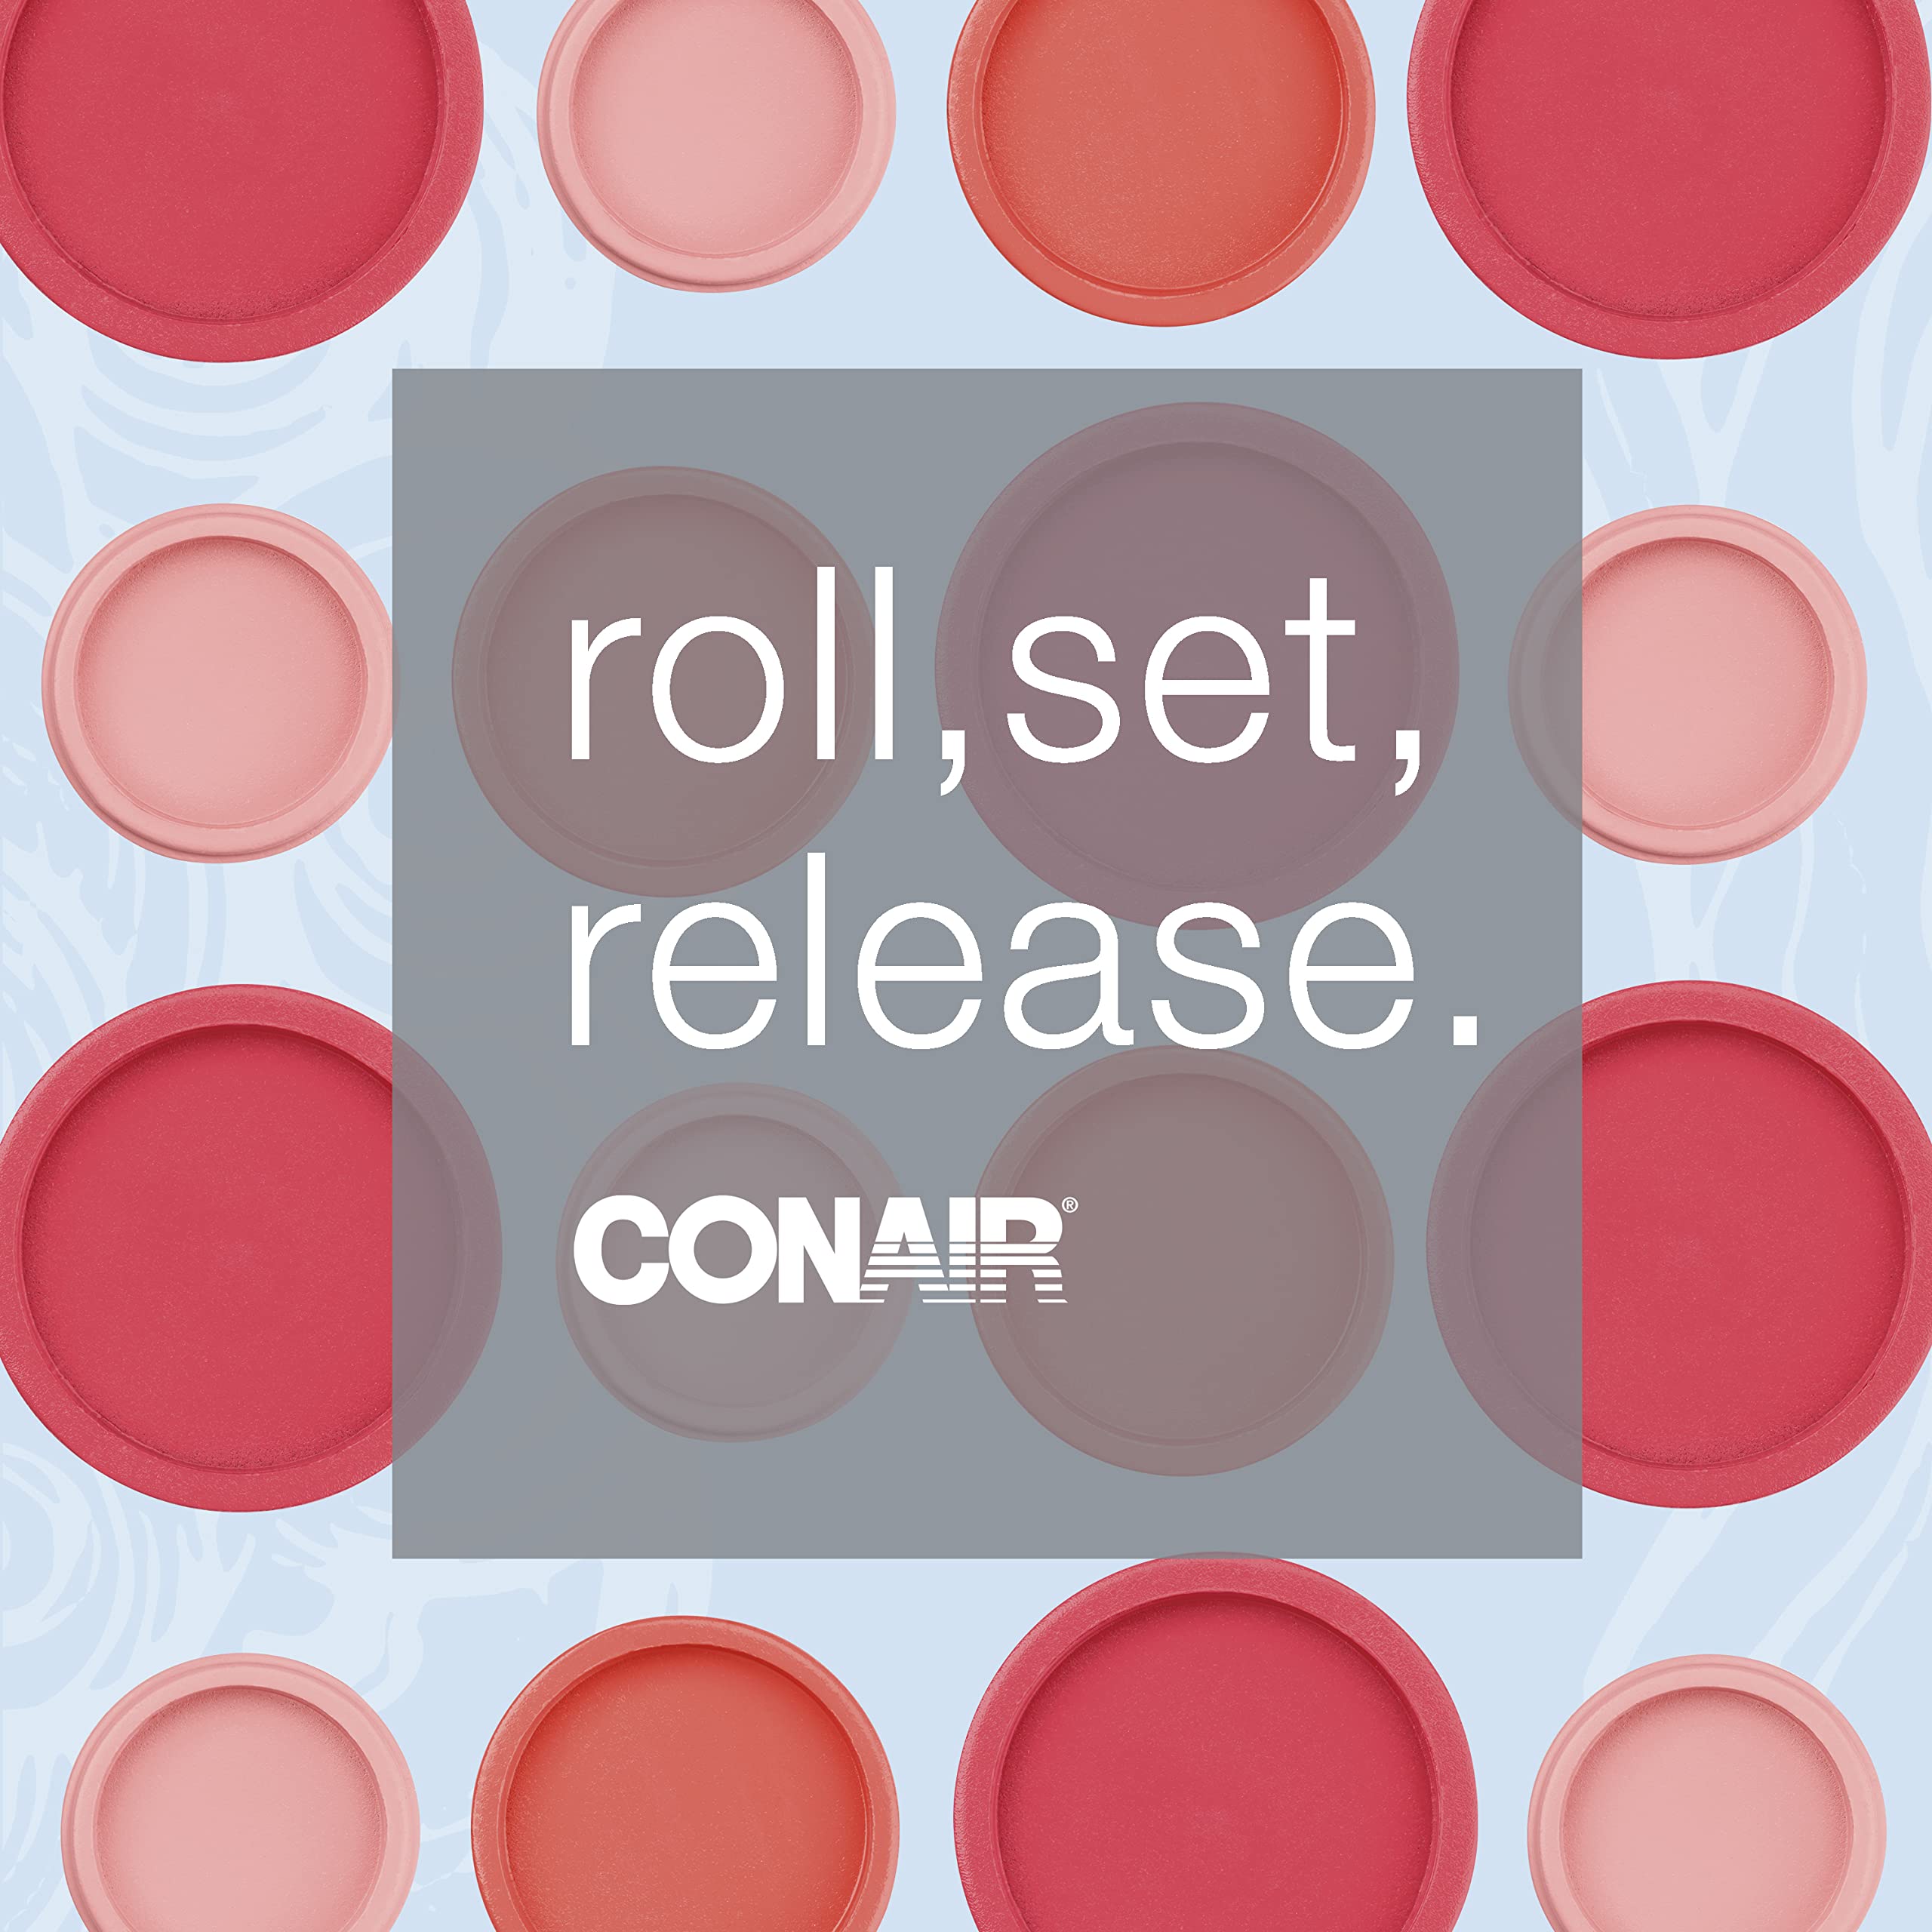 Conair Compact Multi-Size Hot Rollers, Coral